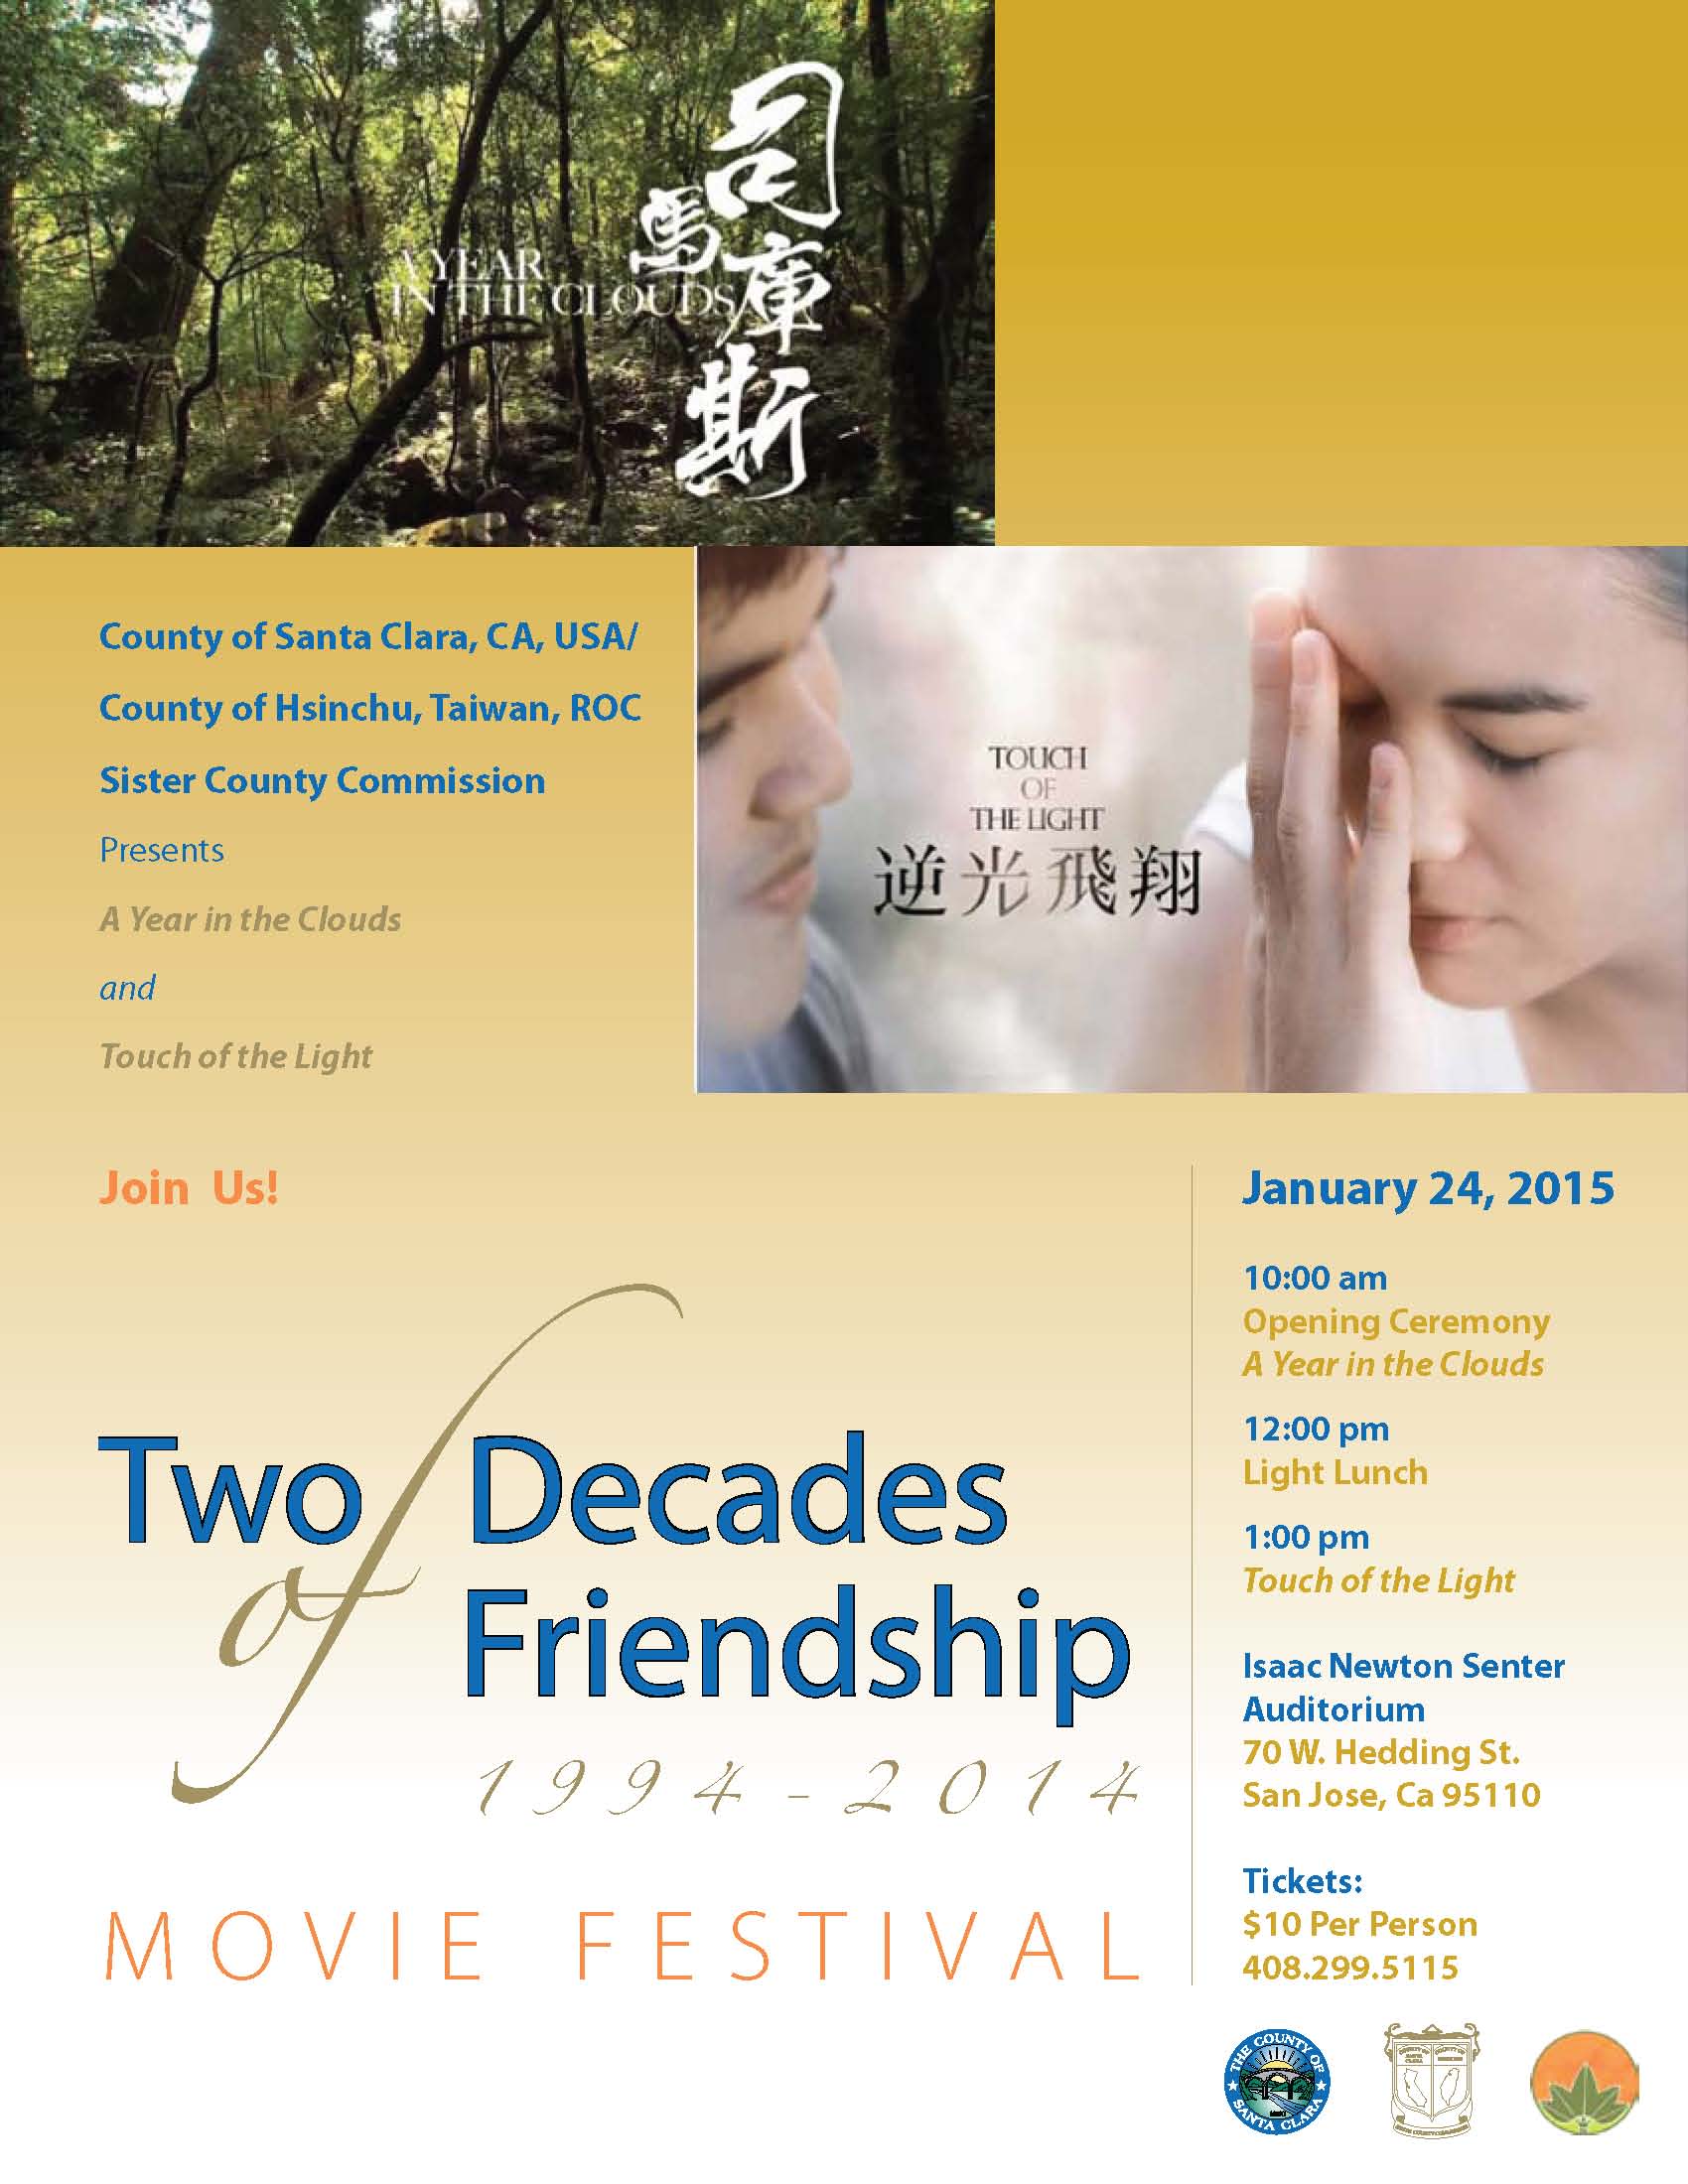 Two Decades of Friendship 1994 - 2014 Movie Festival